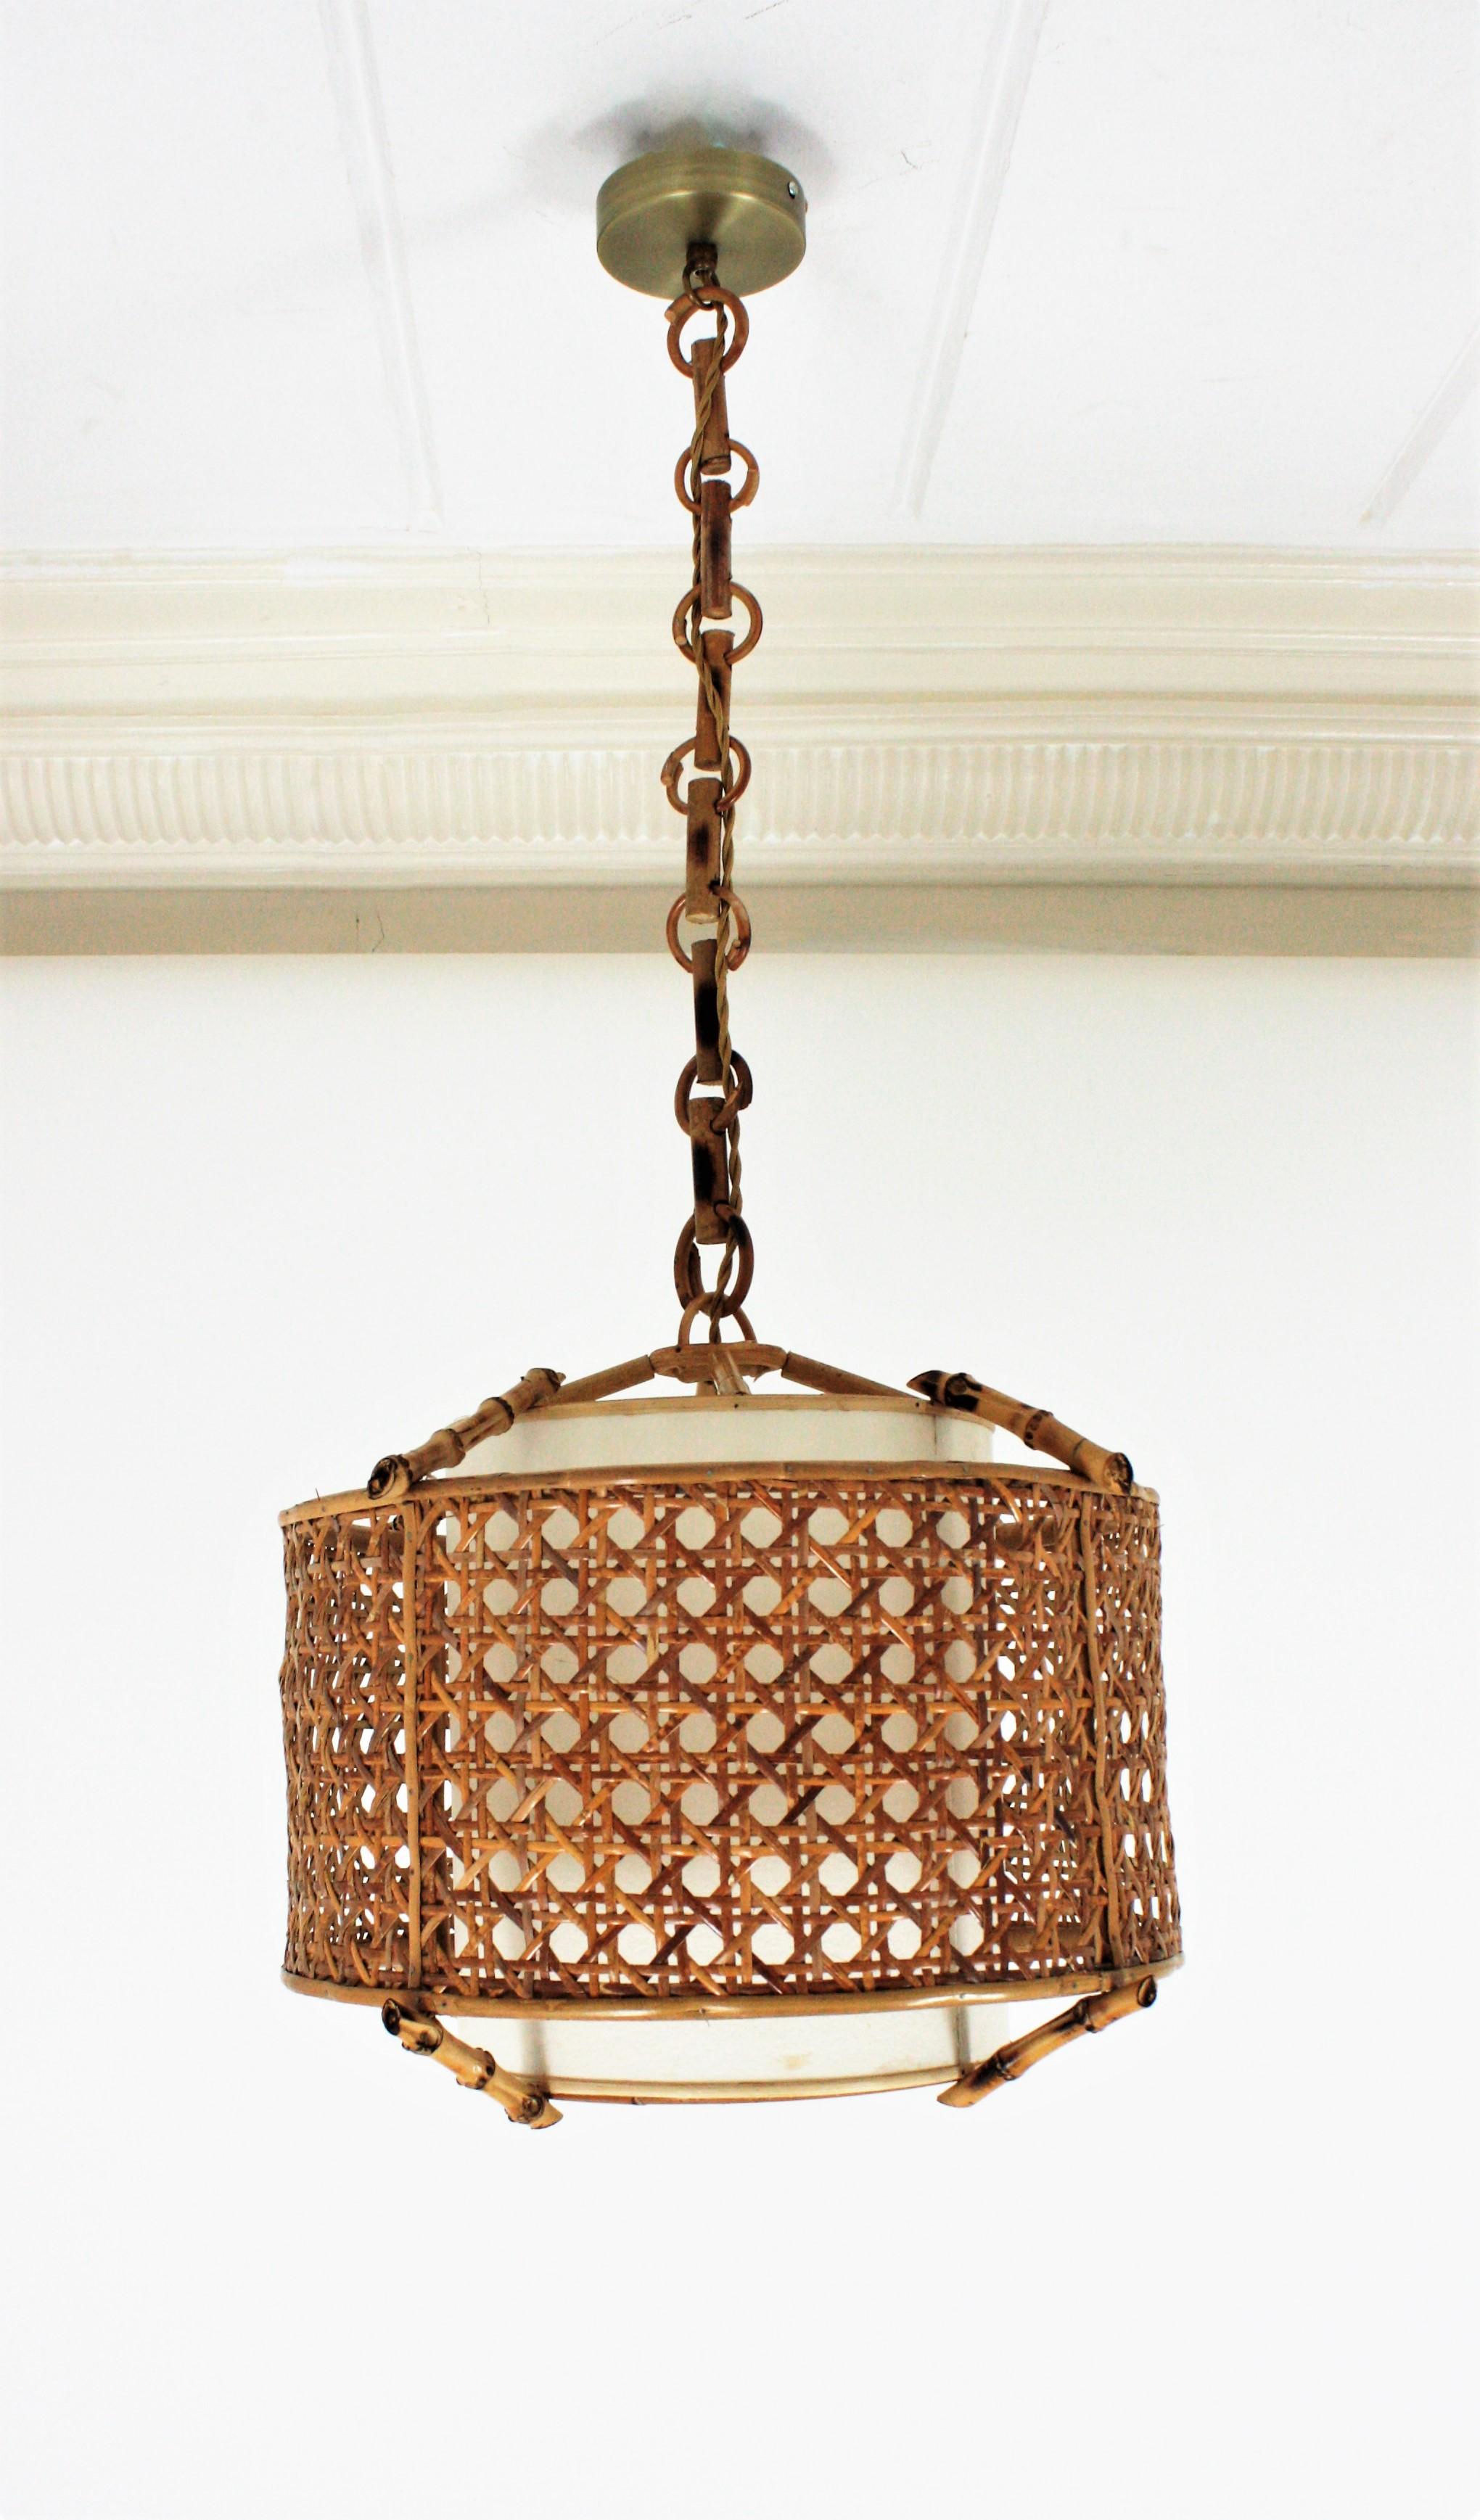 20th Century Bamboo Rattan and Wicker Weave Drum Pendant Lamp or Lantern with Tiki Accents